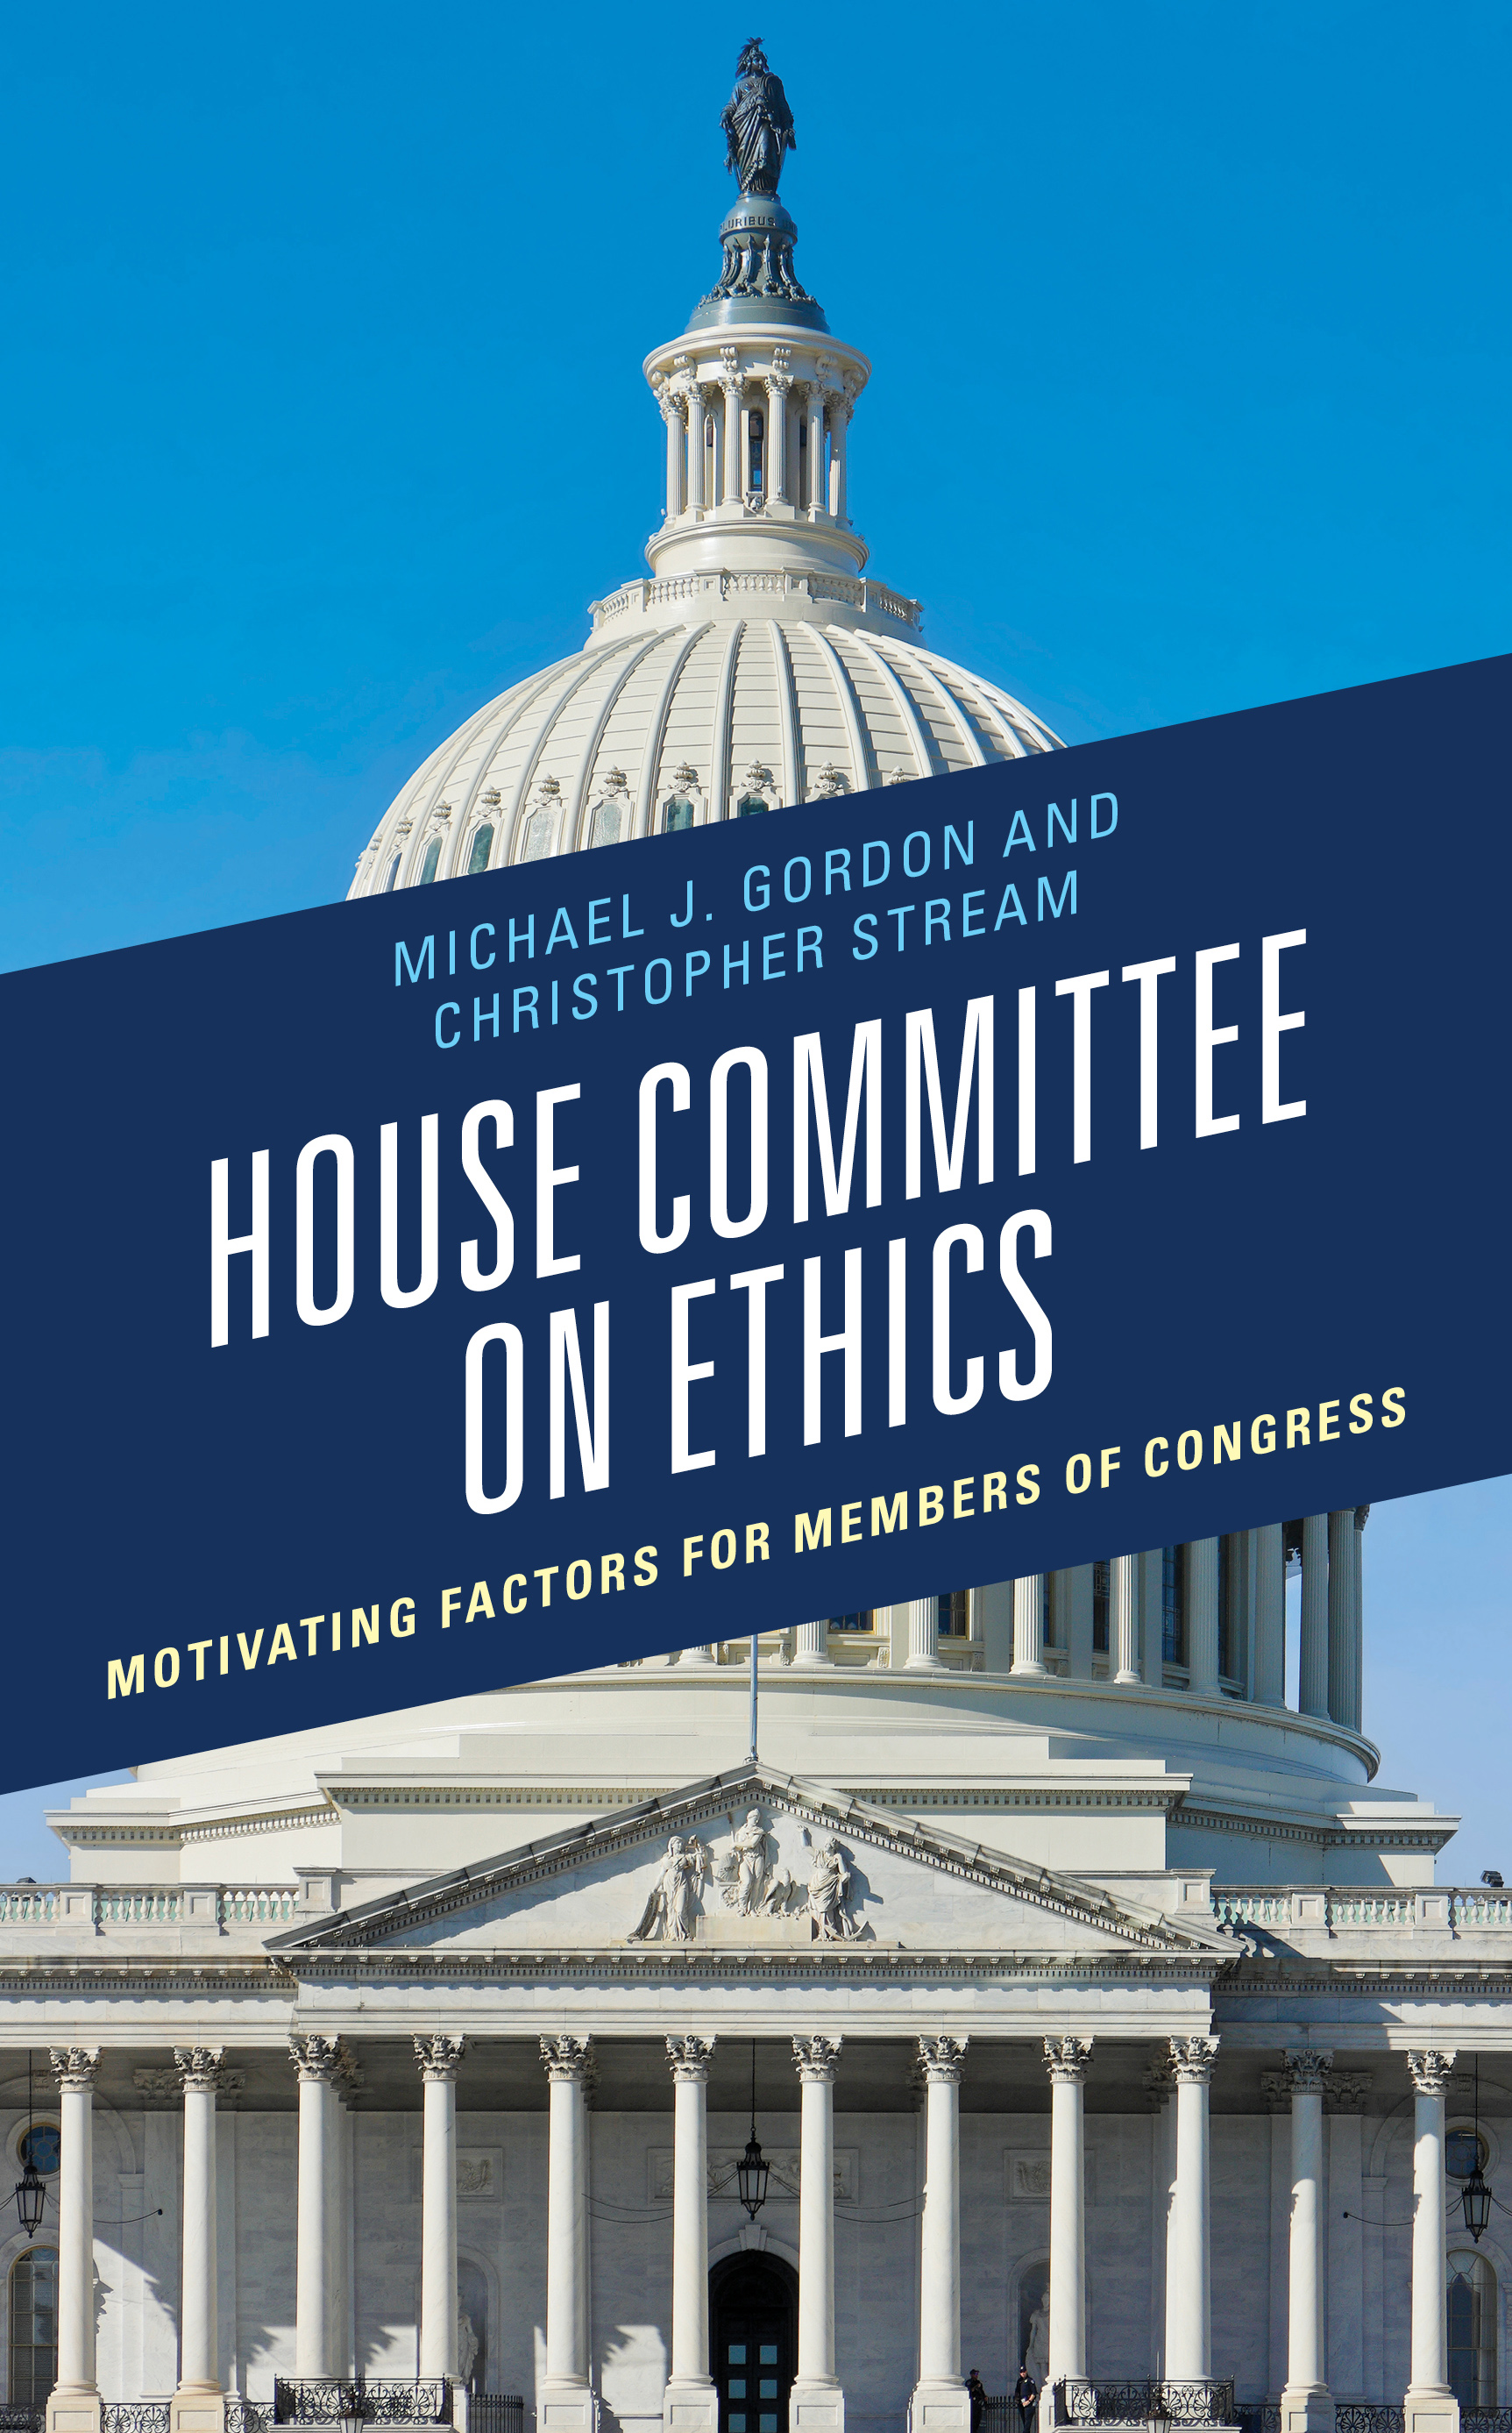 House Committee on Ethics: Motivating Factors for Members of Congress